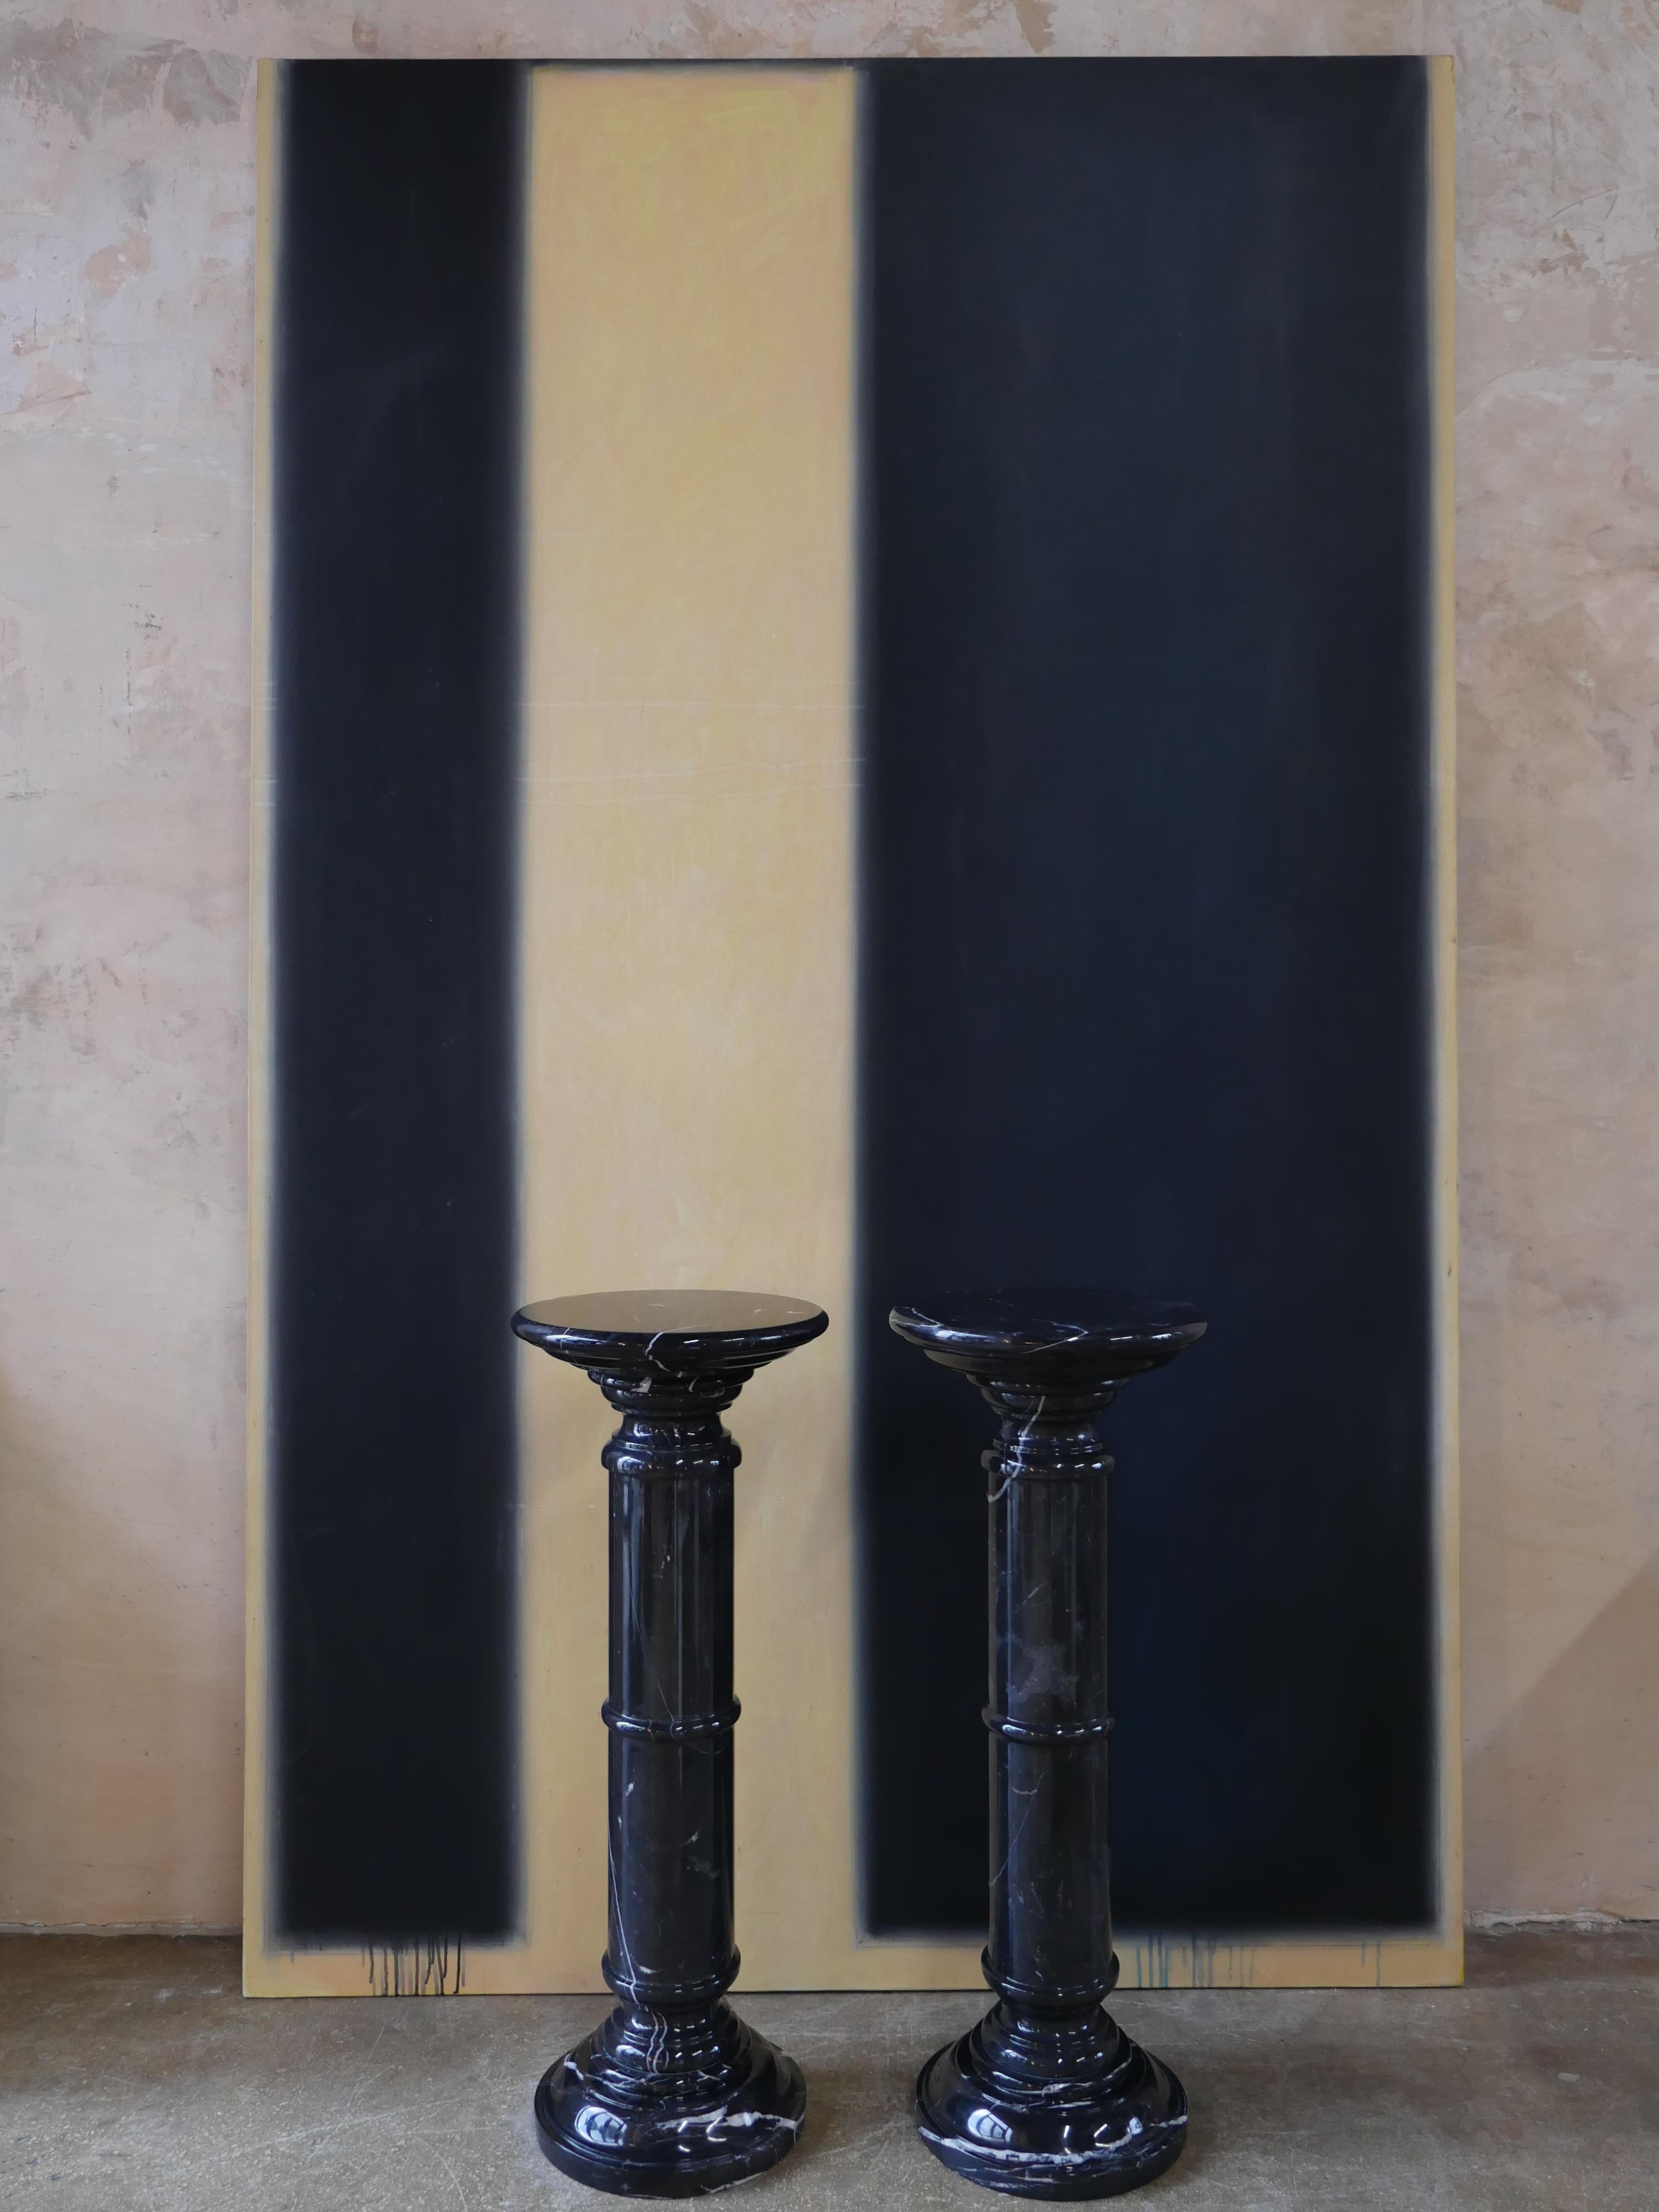 1970s Polished Nero Marquina Solid Marble Pedestals - Set of 2 For Sale 2